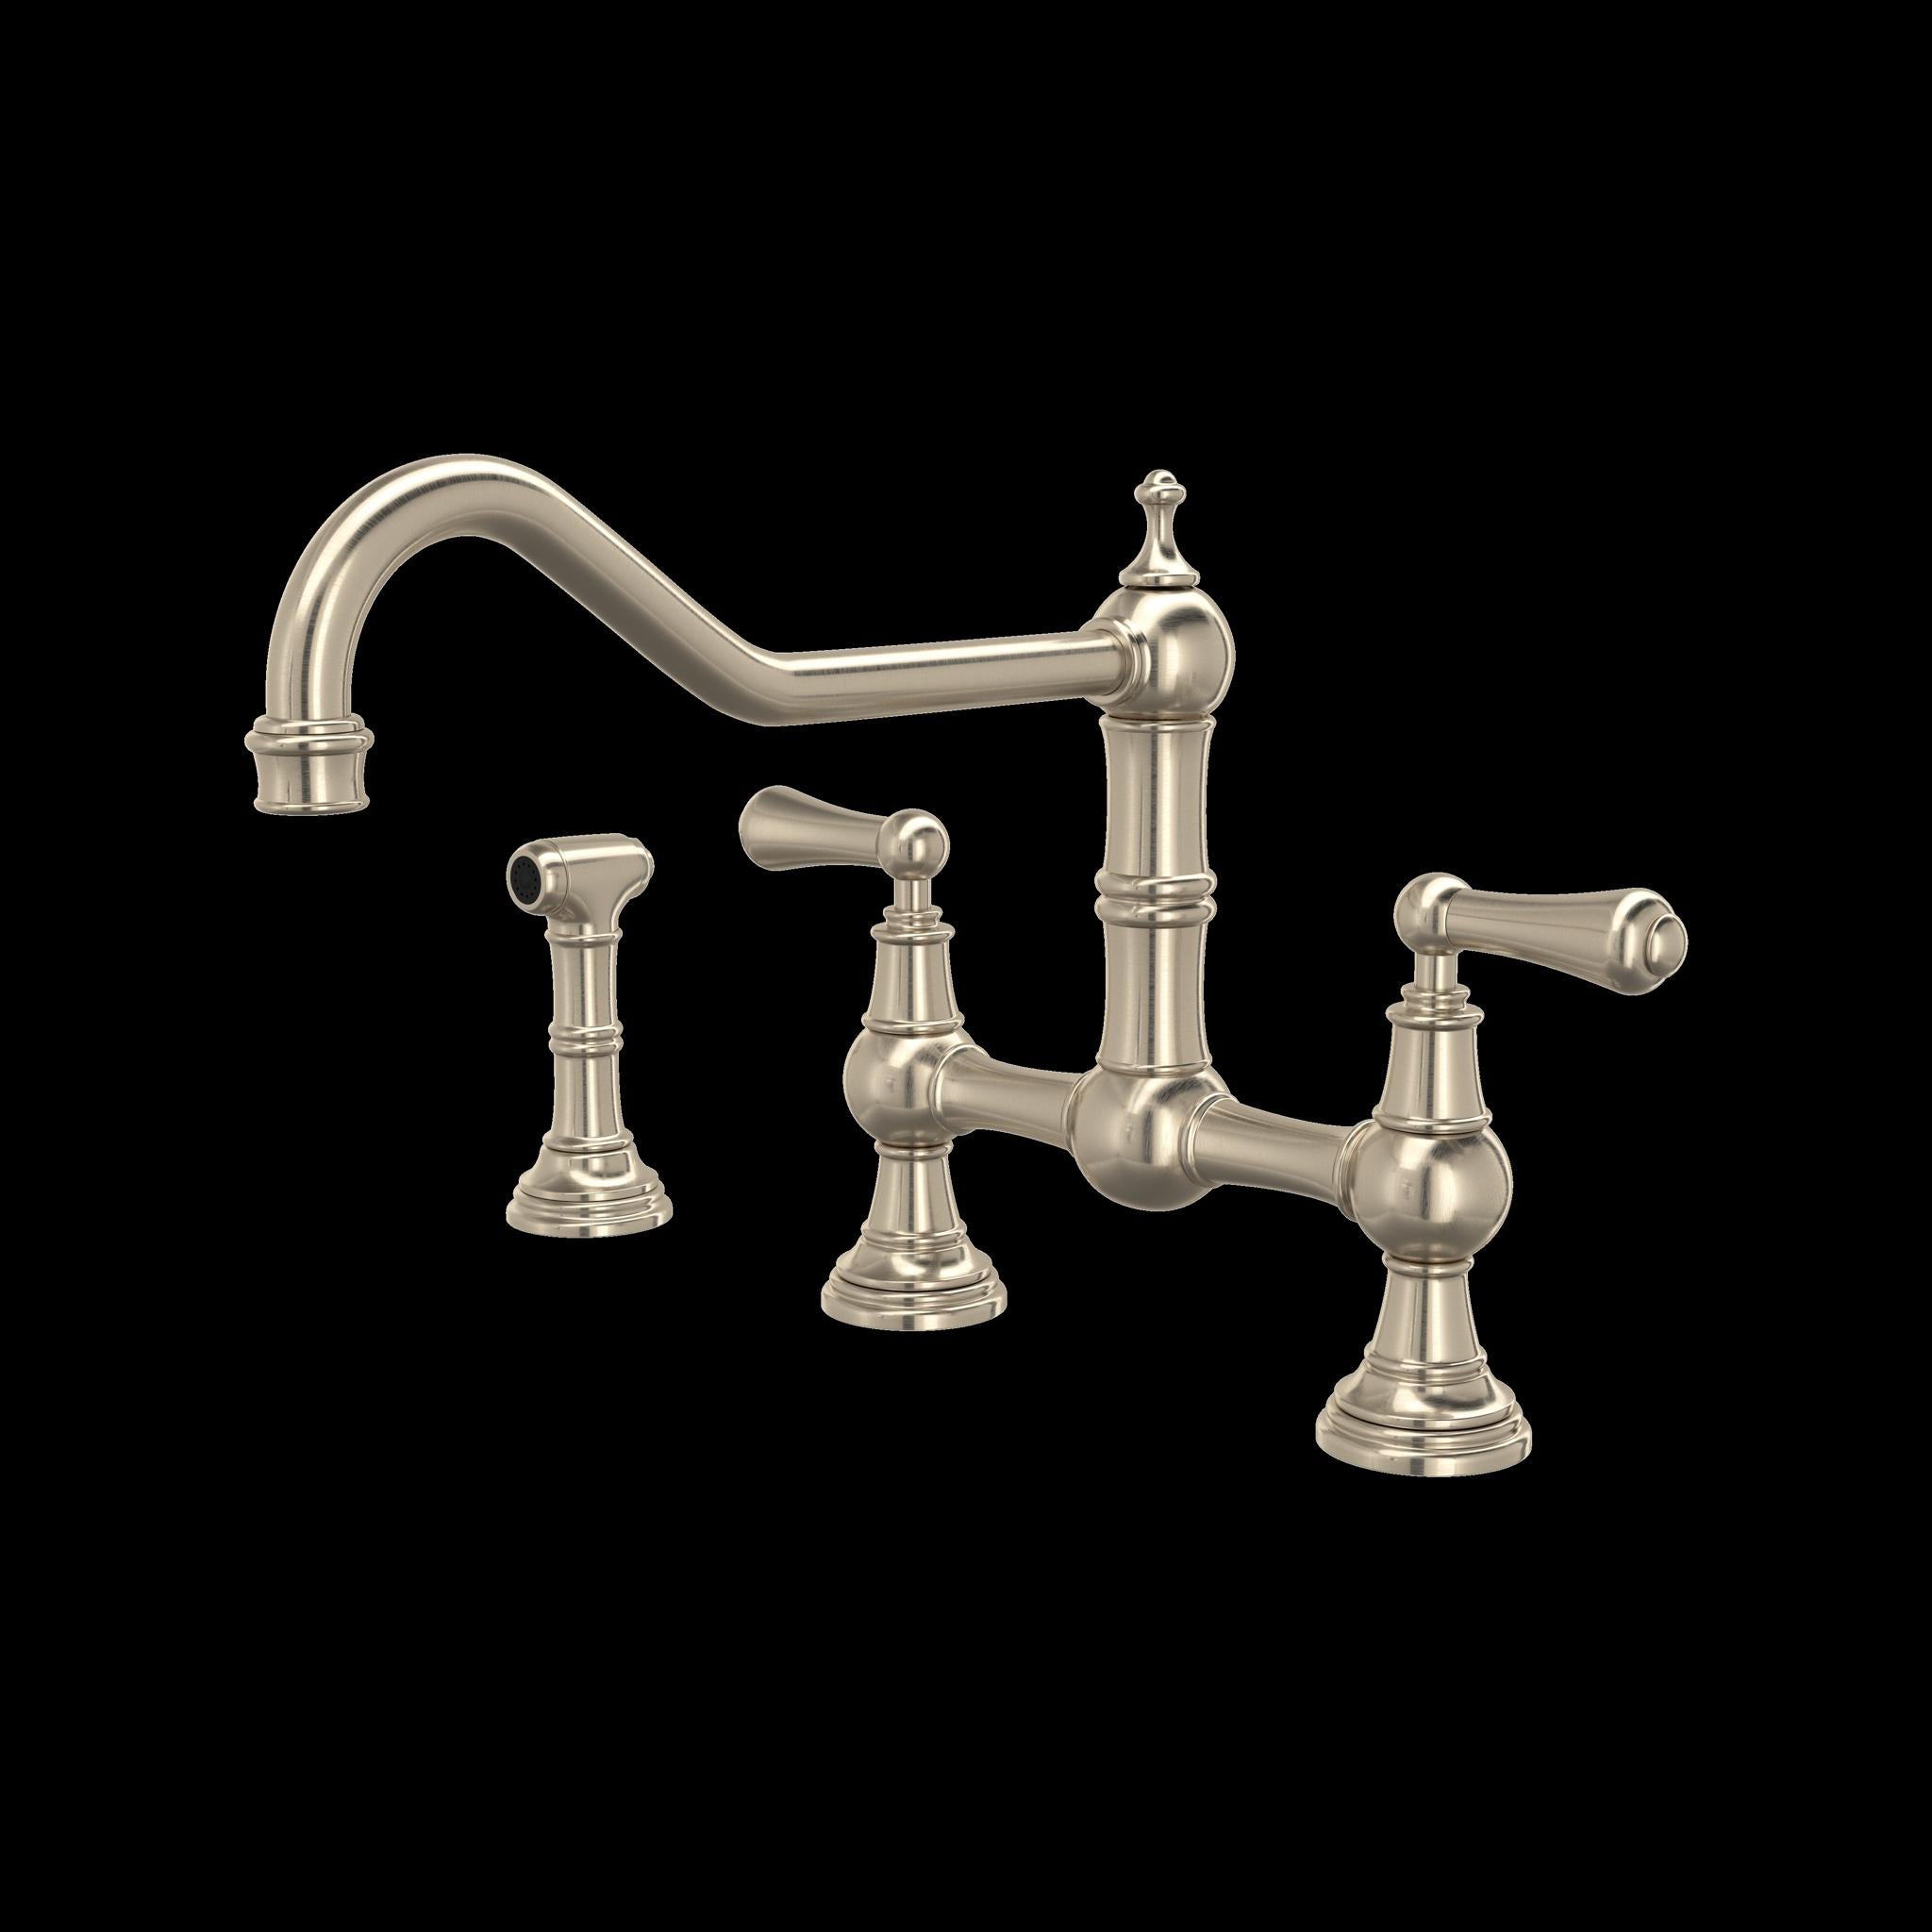 Perrin & Rowe U.4764 Edwardian Extended Spout Bridge Kitchen Faucet With Side Spray